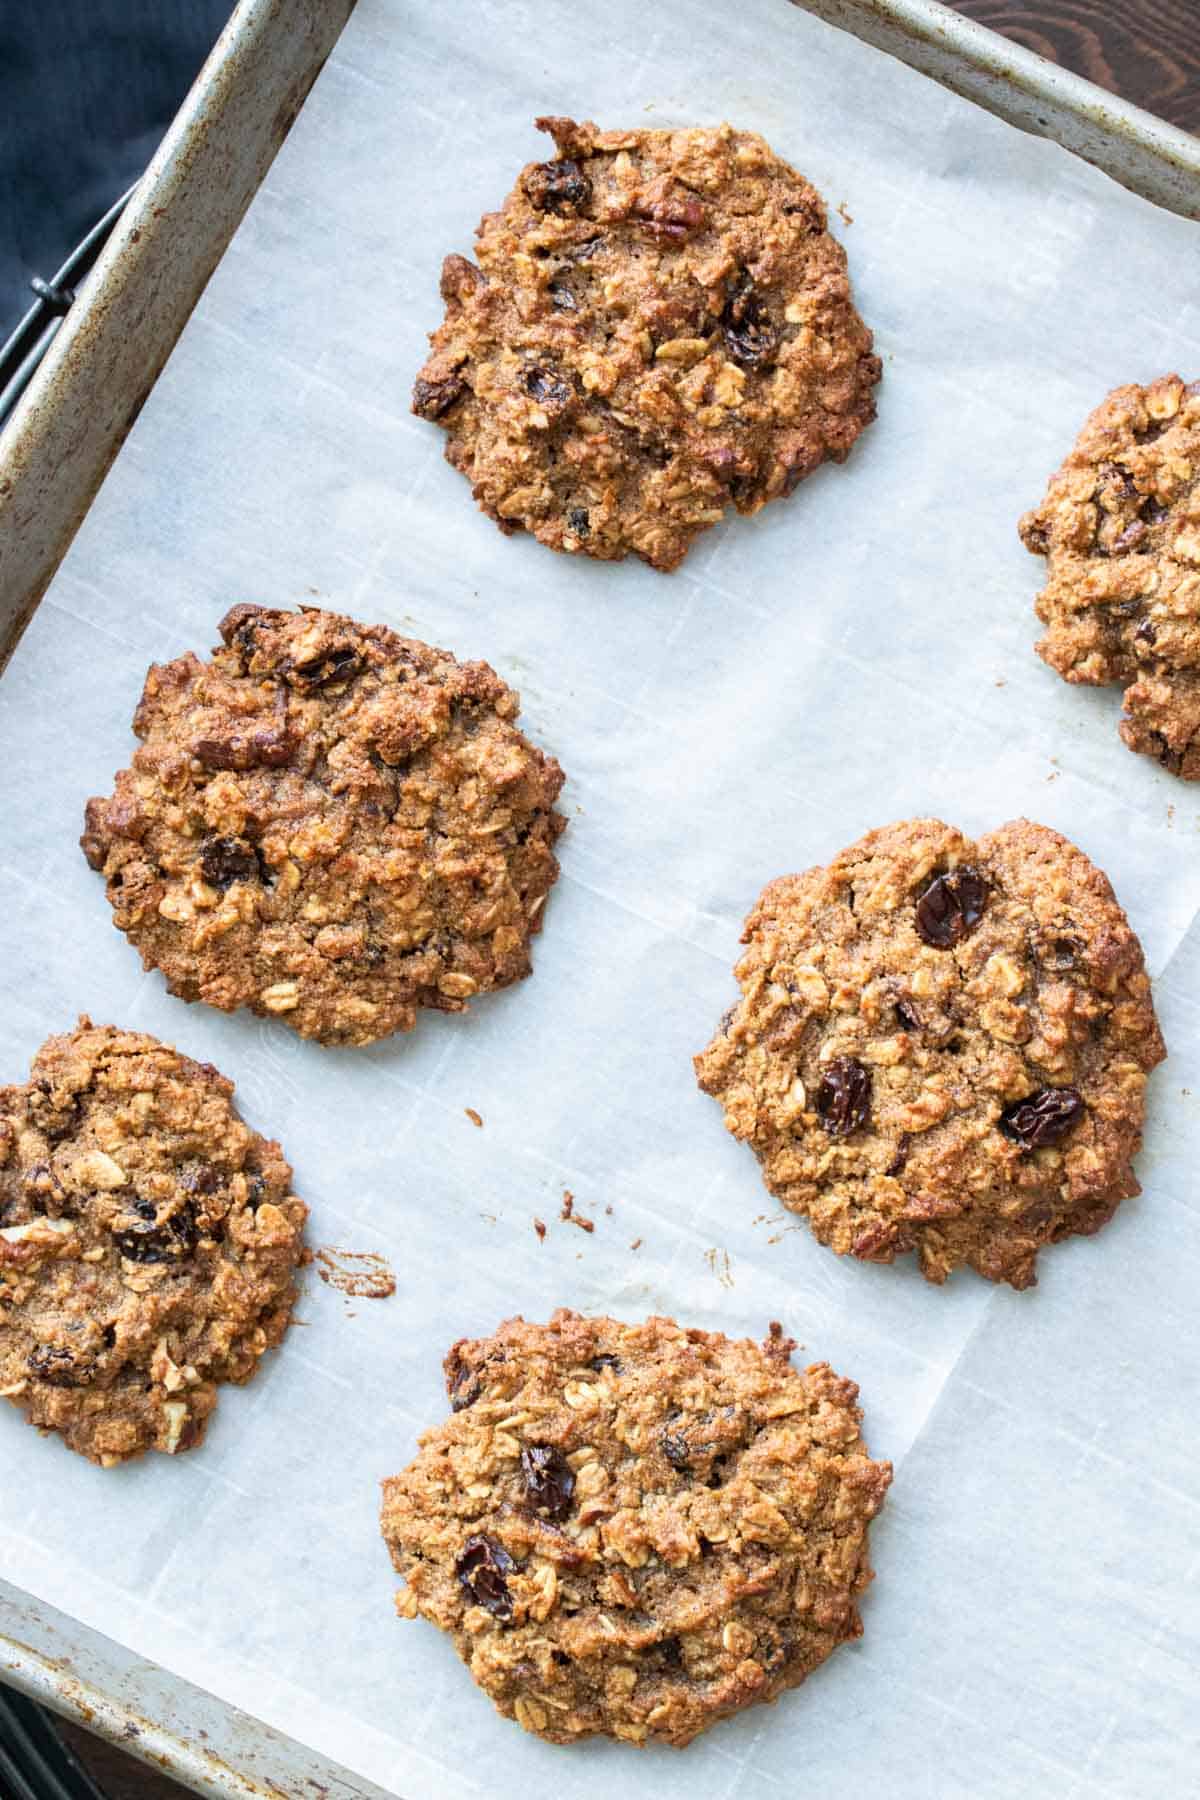 Parchment paper on a cookie sheet with baked oatmeal raisin cookies